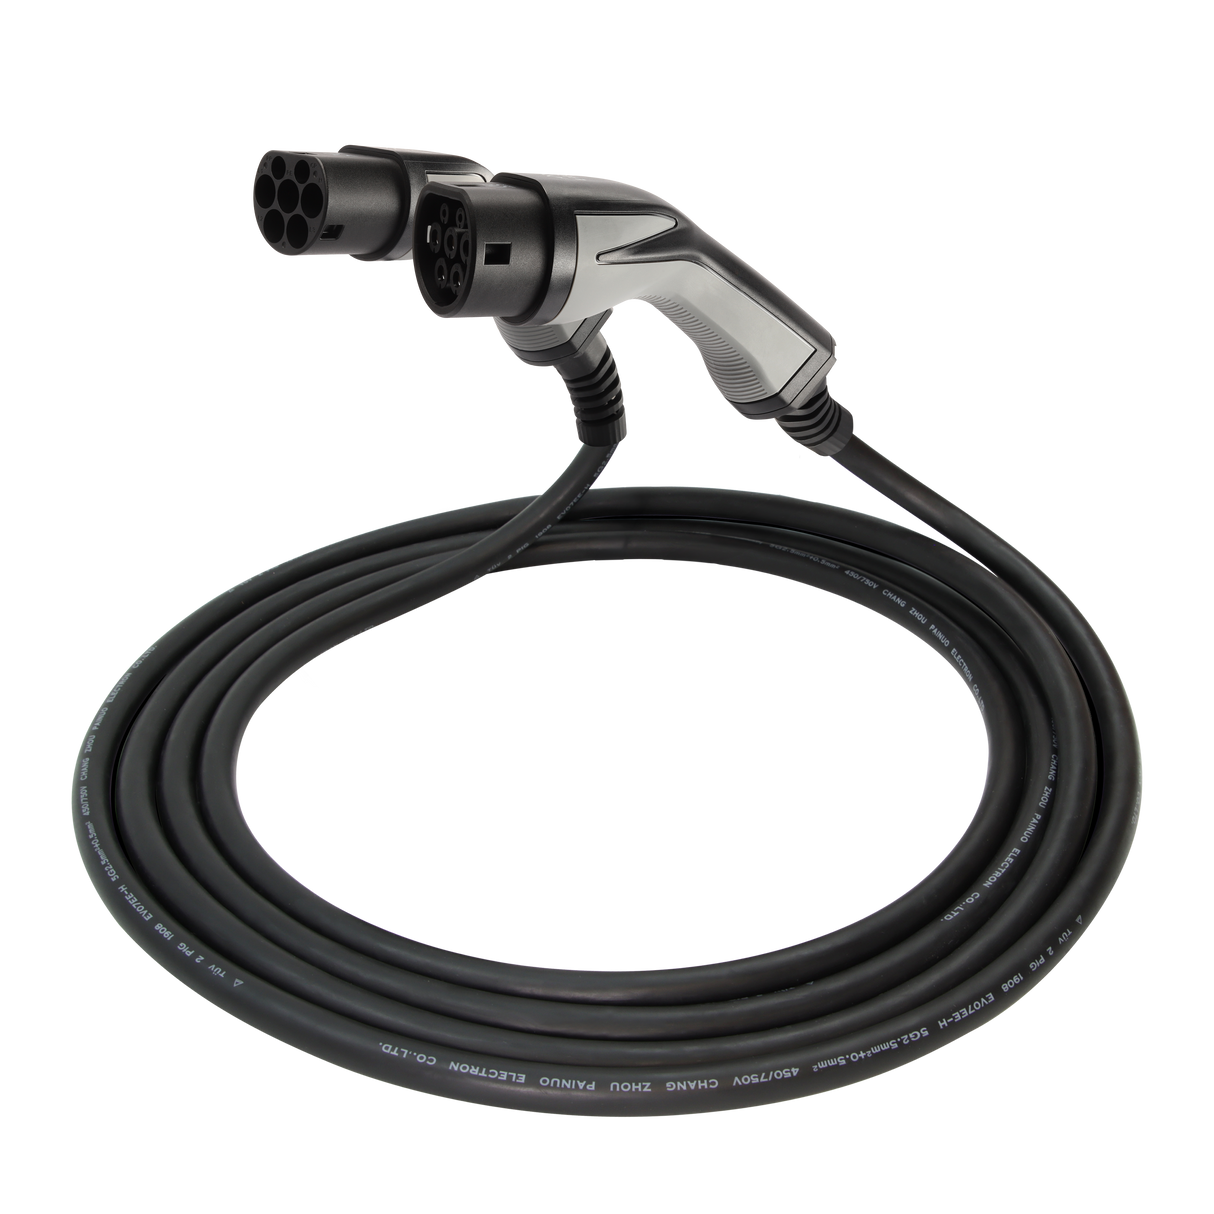 Charging cable Mercedes Evito - Erock Pro Type 2 - 16A 3 phase (11 kW)